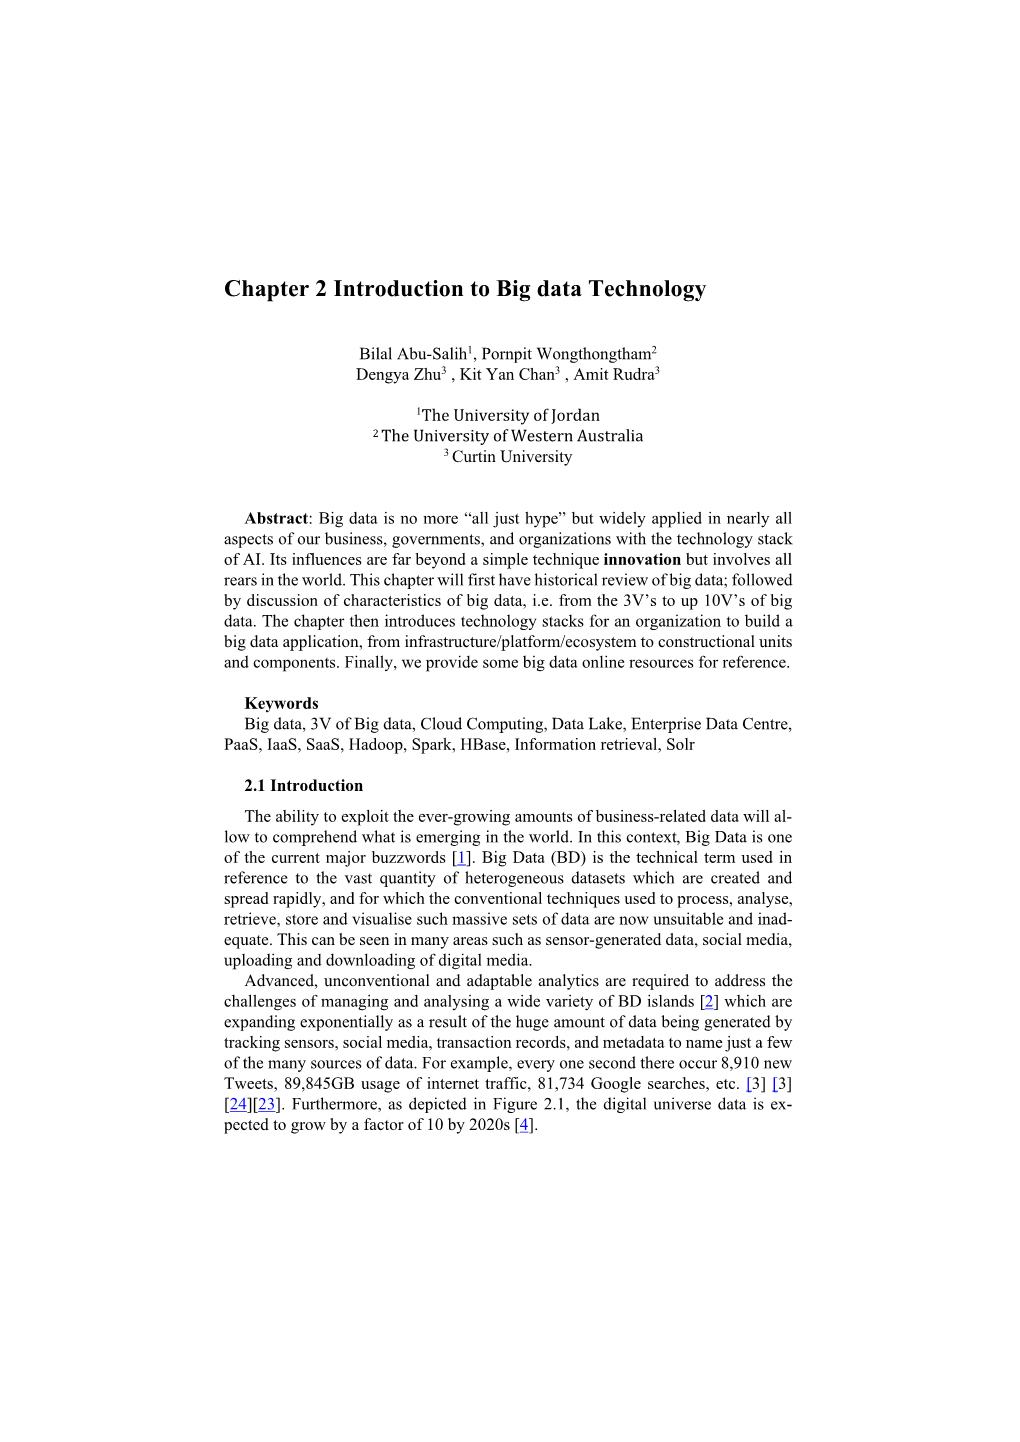 Chapter 2 Introduction to Big Data Technology